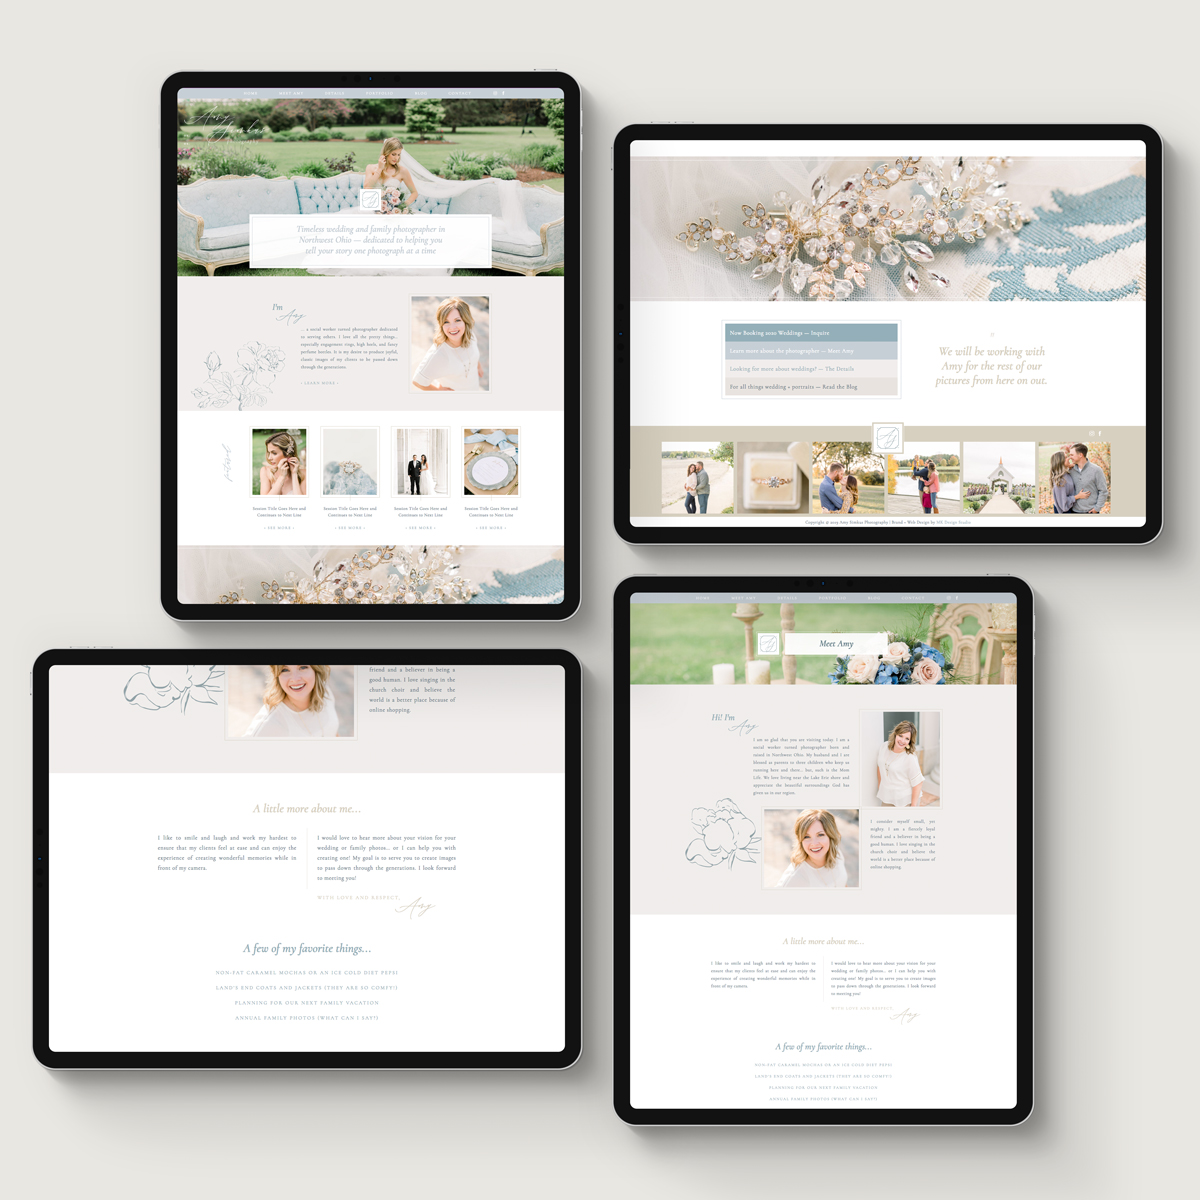 Four ipads showing various website pages for Amy Simkus Photography